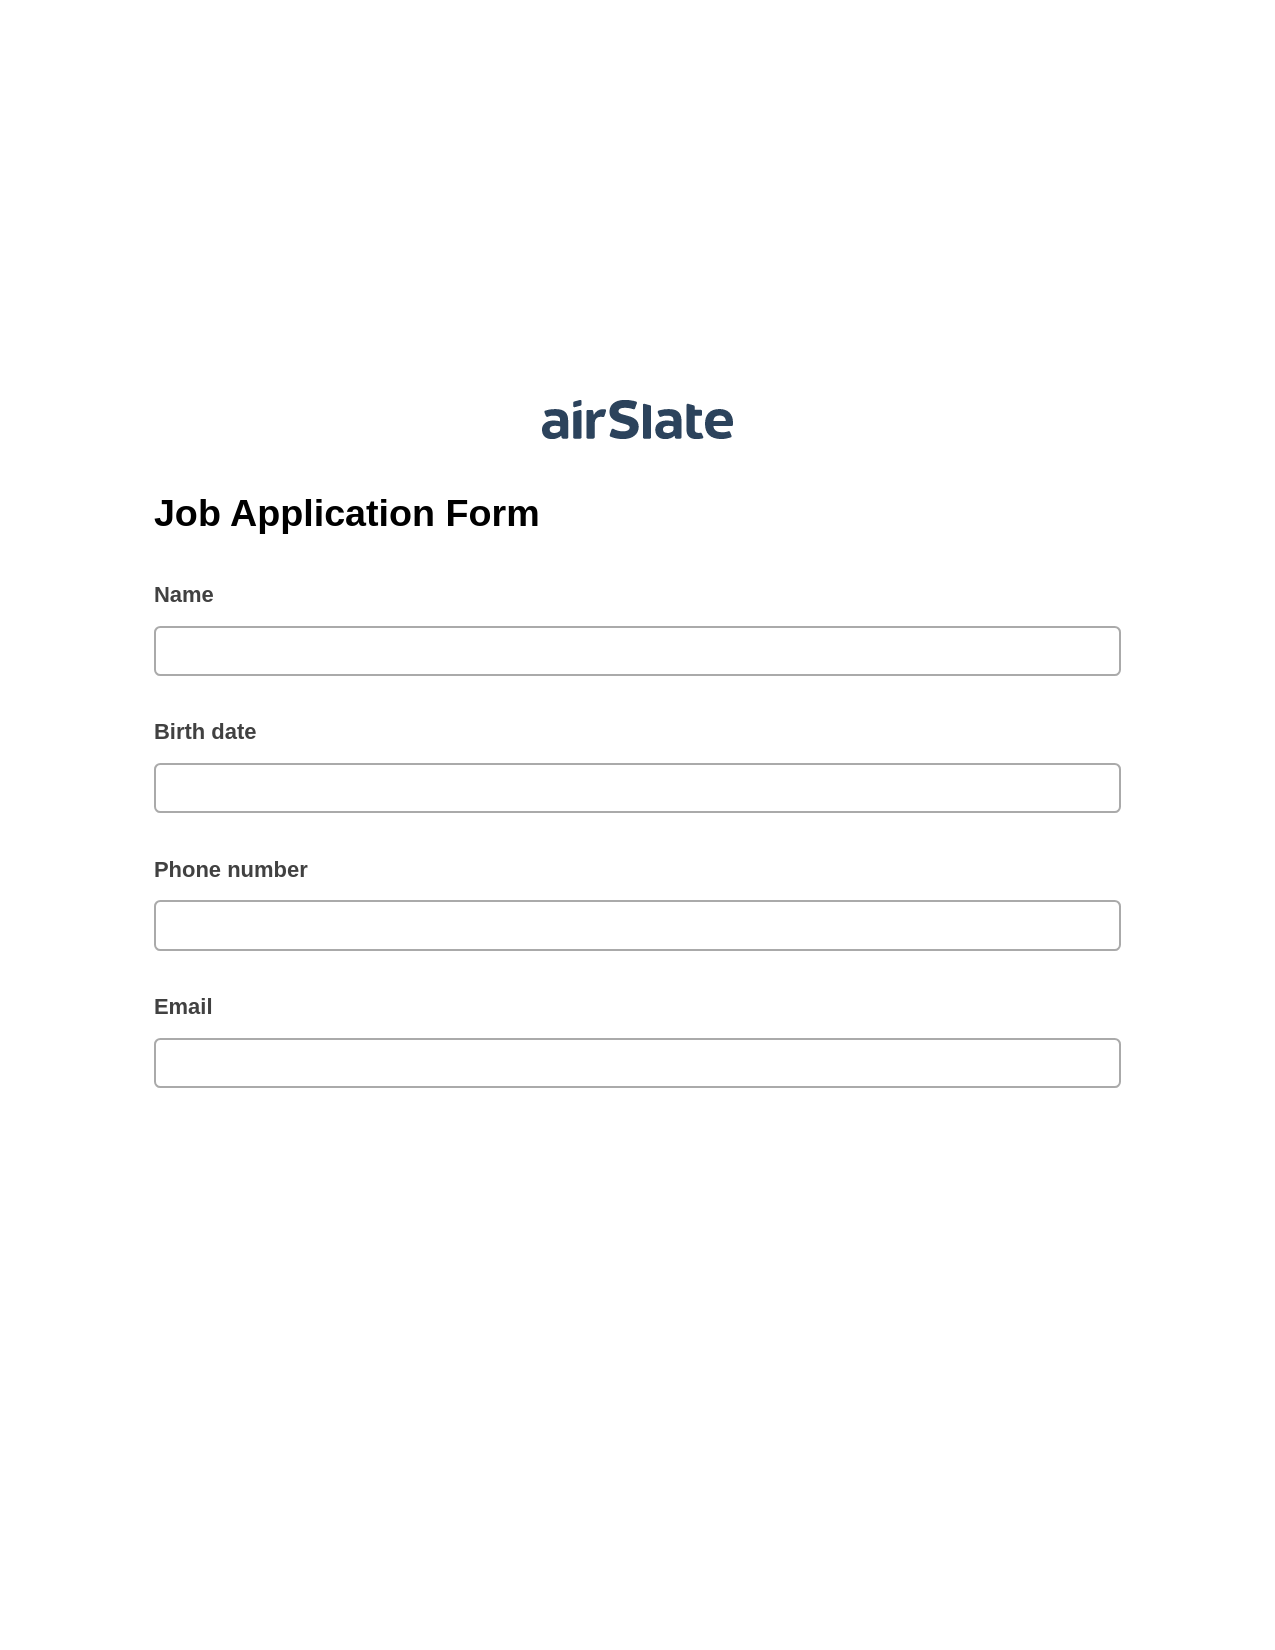 Job Application Form Pre-fill from Smartsheet Bot, Create slate addon, Export to NetSuite Record Bot